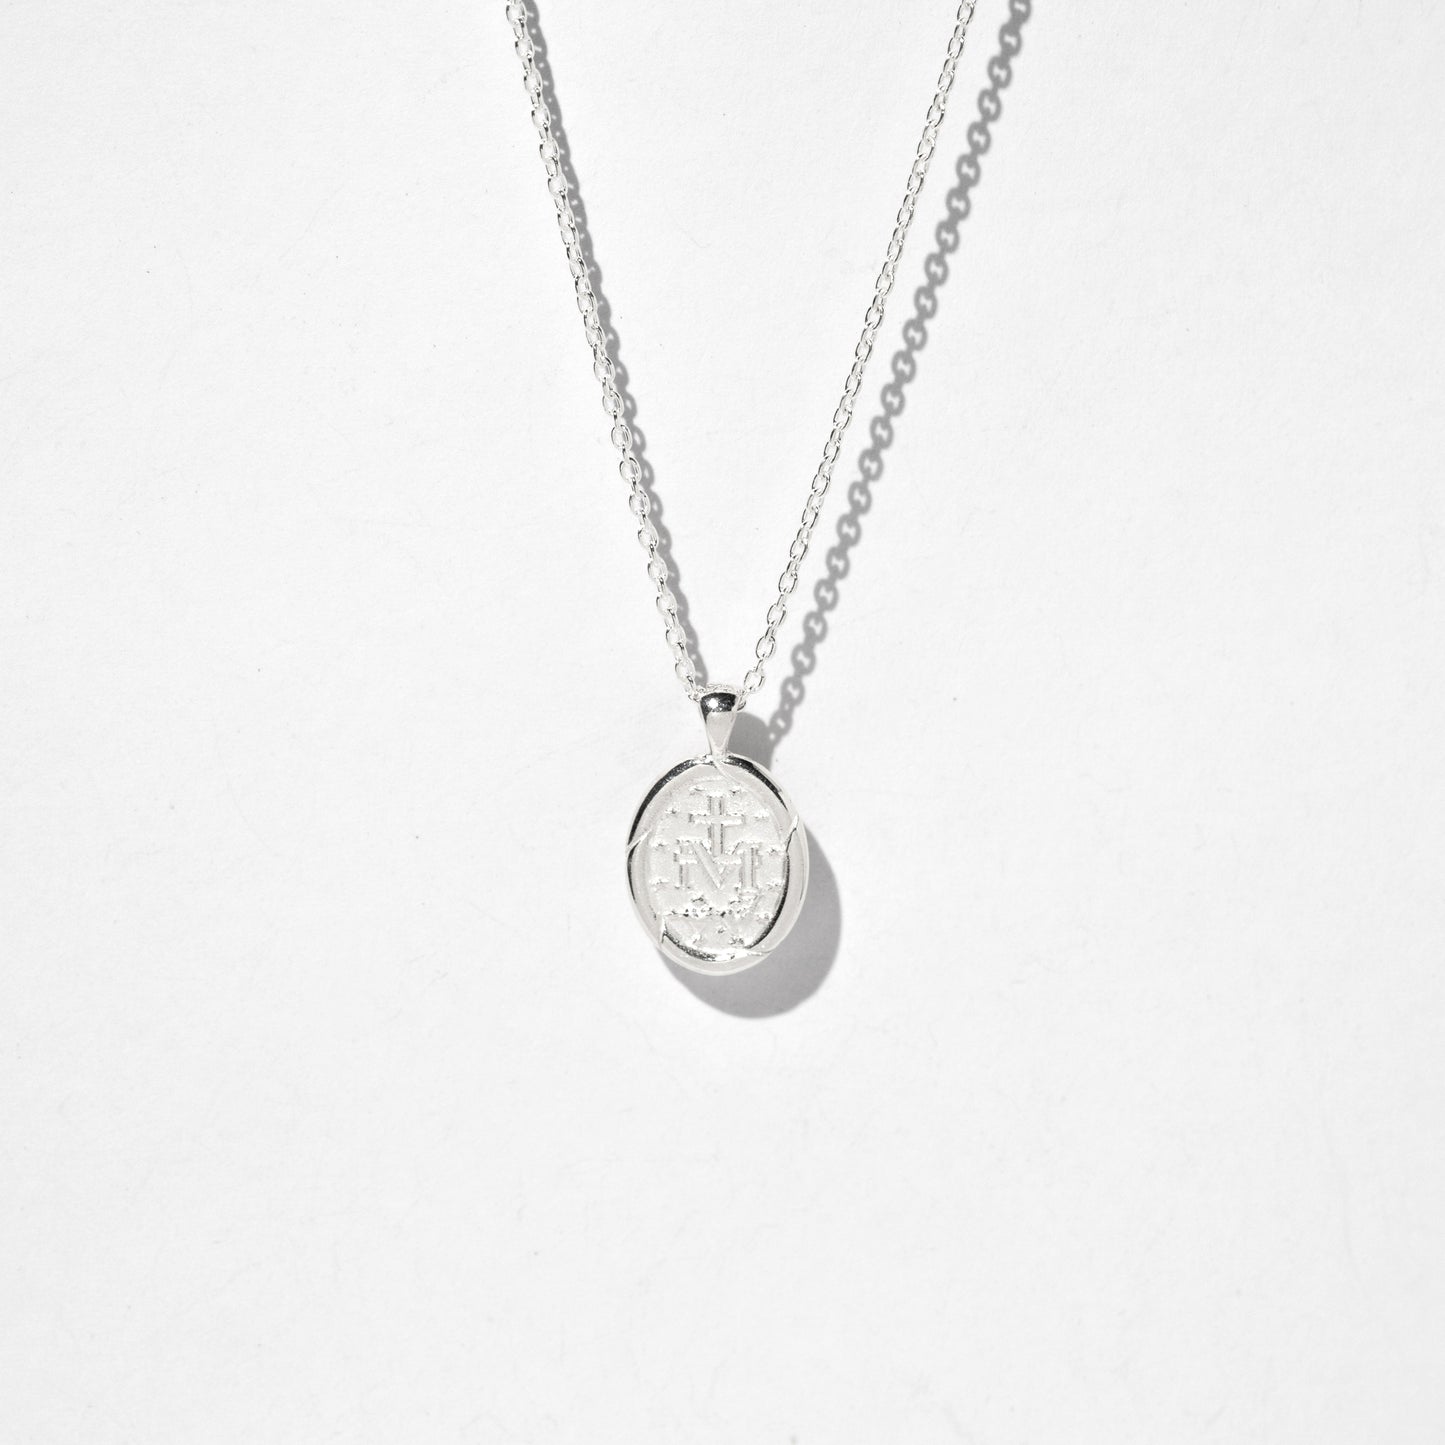 The Miraculous Medal Necklace